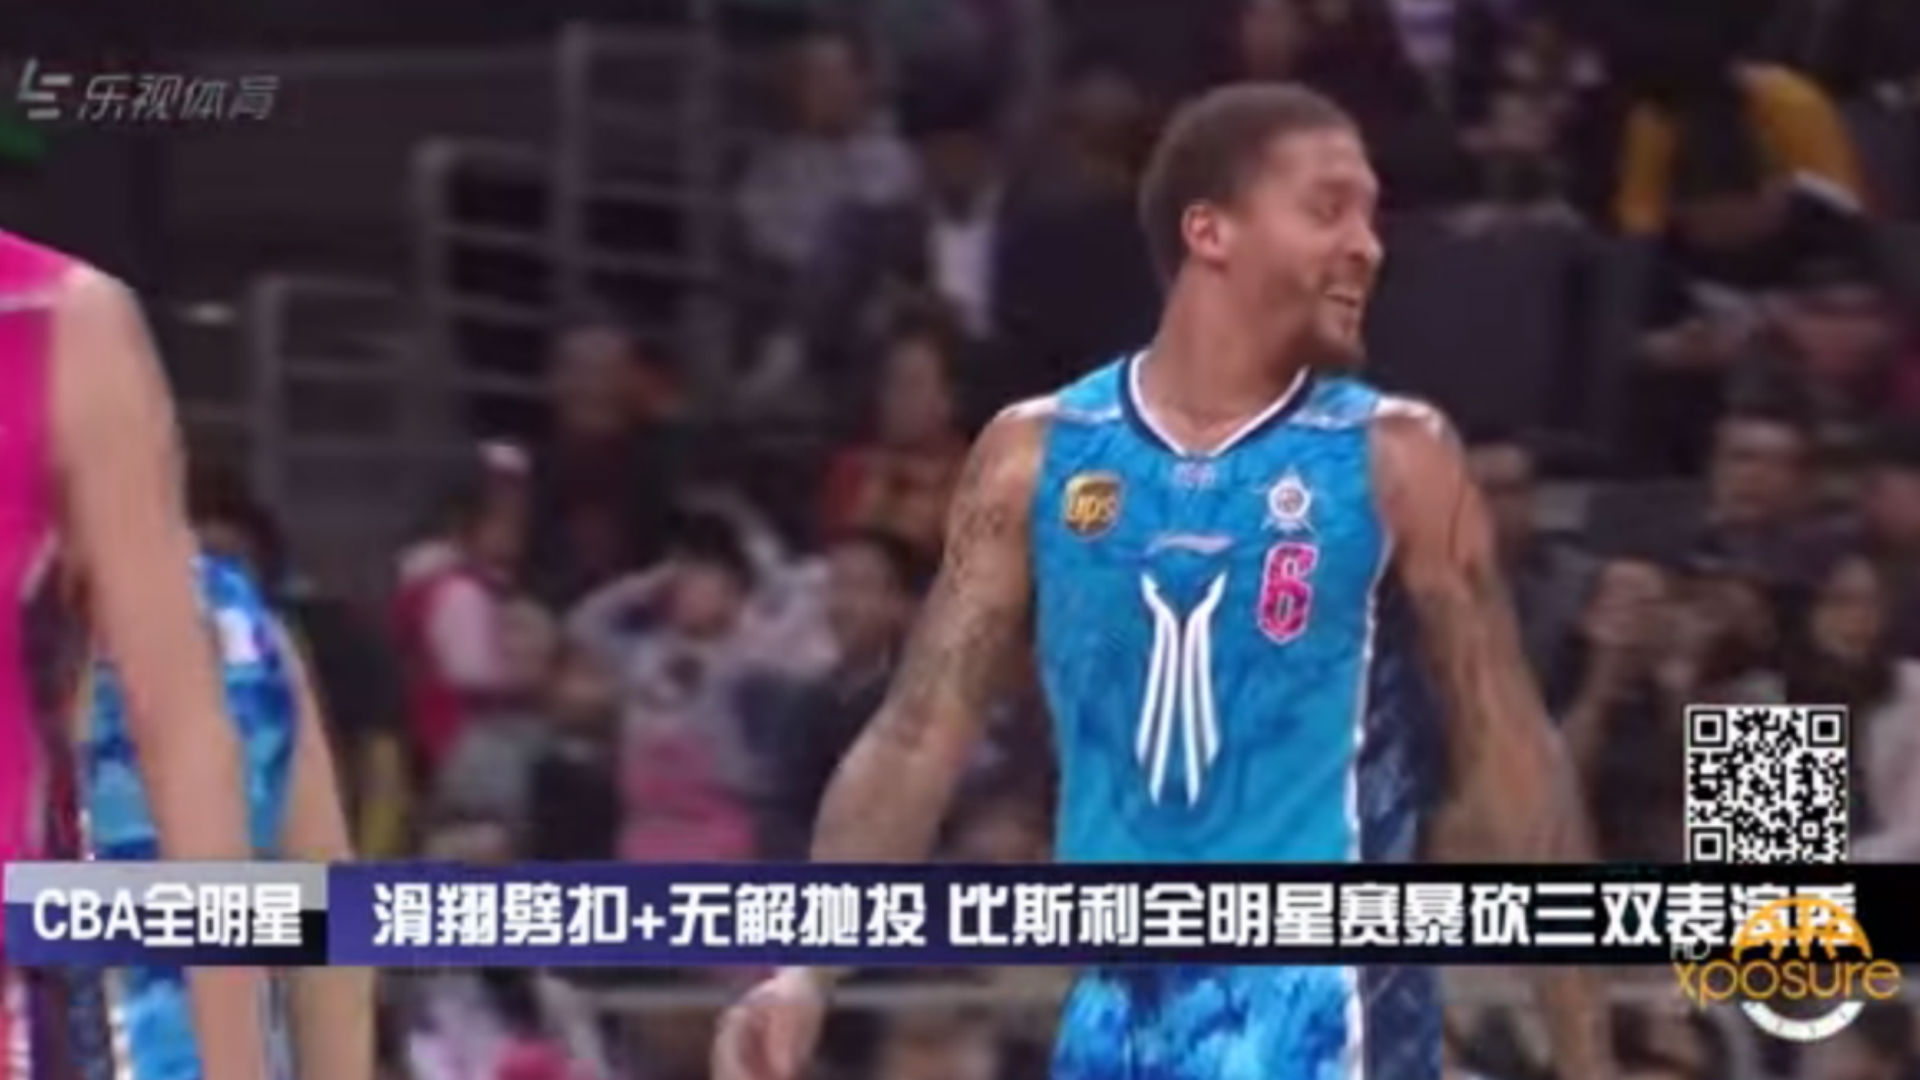 Michael Beasley drops 63 points in Chinese Basketball Association ...